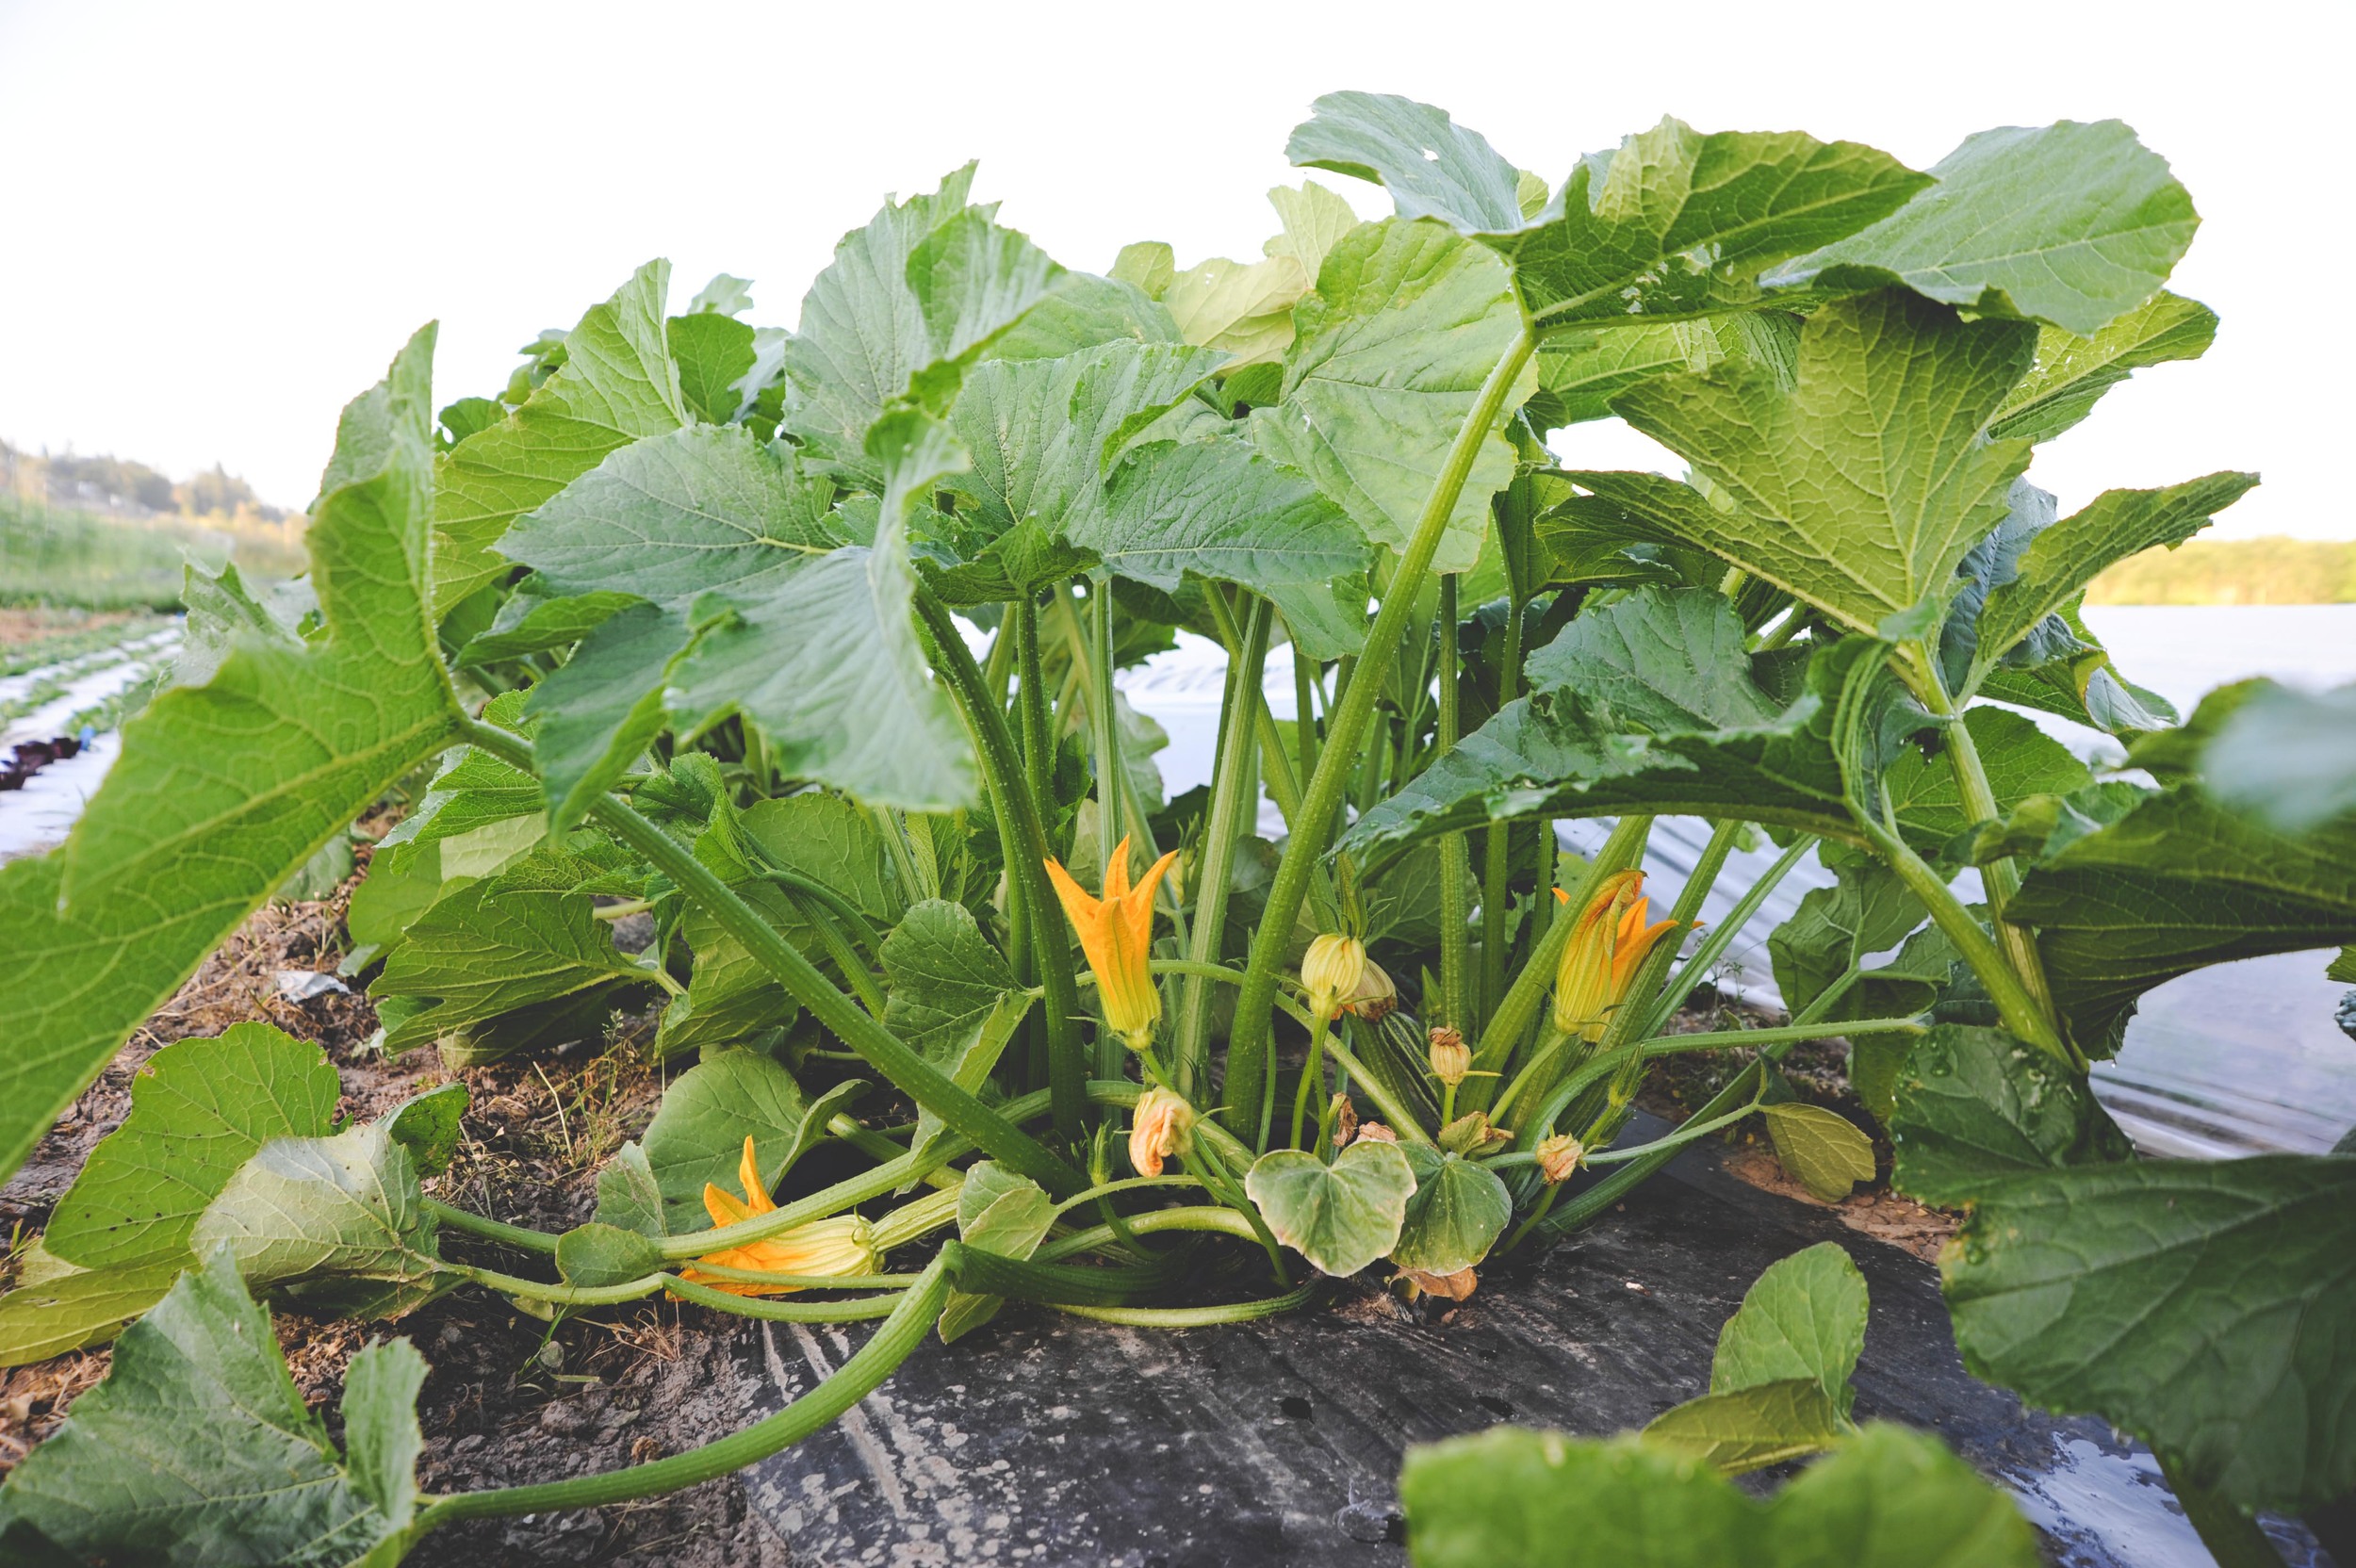 Image of Squash plant in summer